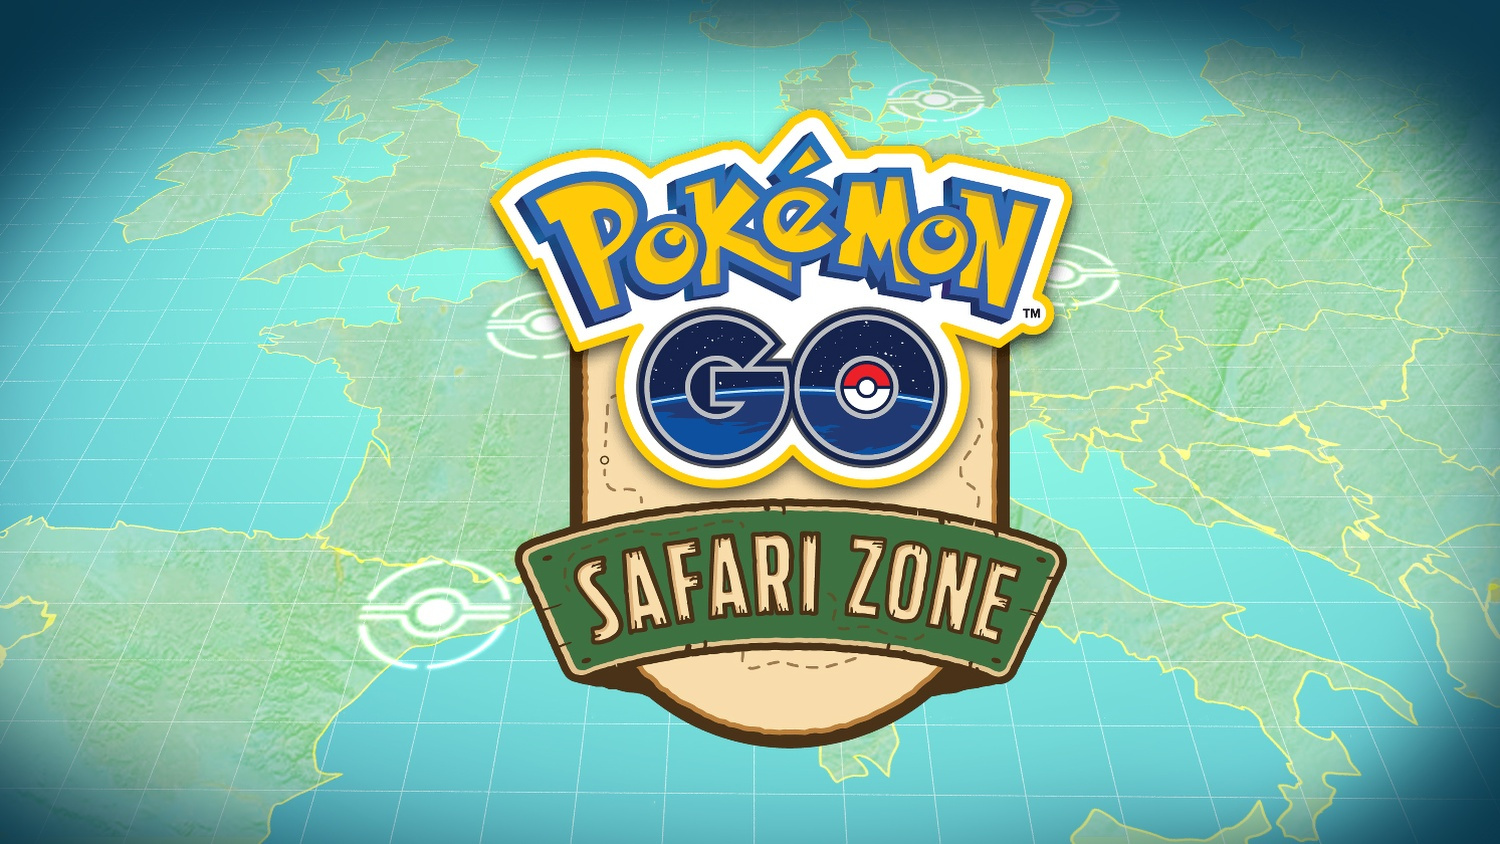 Pokémon ﻿GO 2020 Global Events Revealed, Safari Zones To Be Held In US And UK﻿ - Nintendo Life